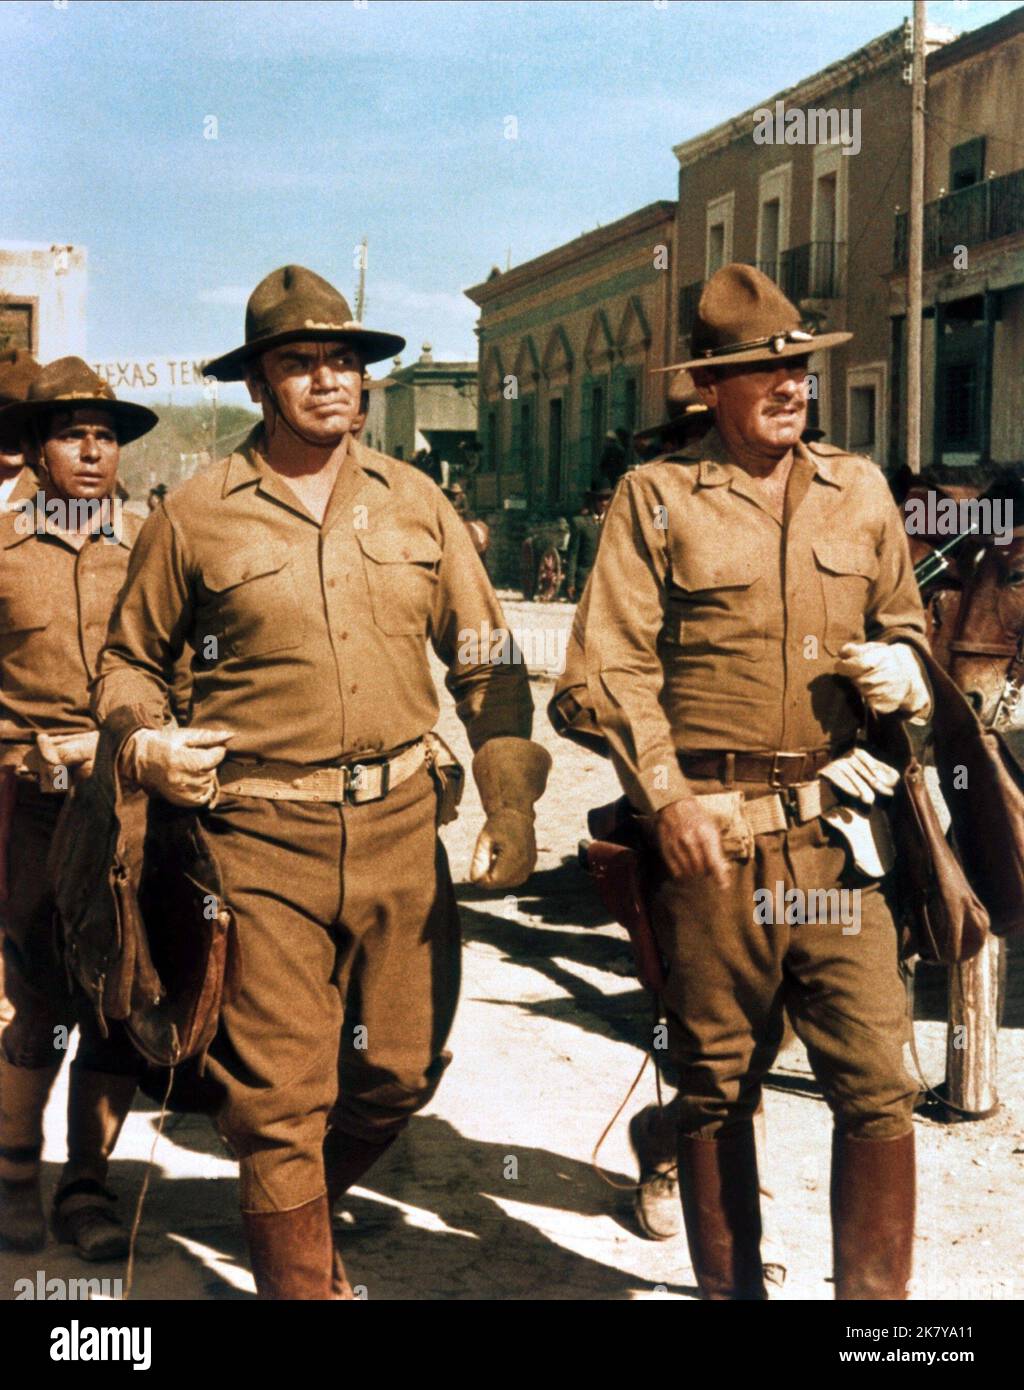 THE WILD BUNCH WILLIAM HOLDEN as Pike Bishop Date: 1969 Stock Photo - Alamy